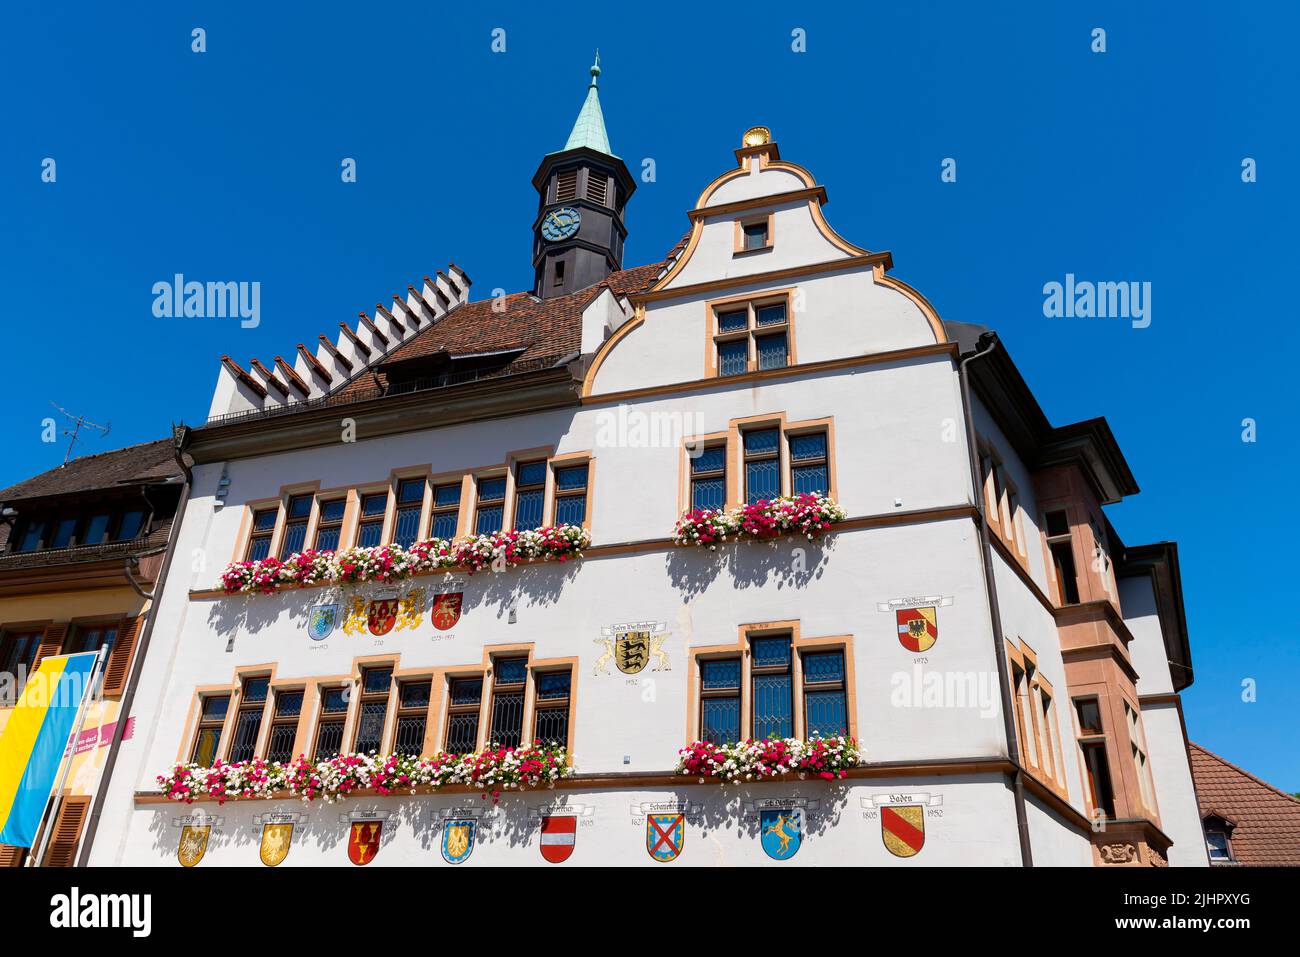 Town Hall in town Staufen the historical city of Faust. Staufen im Breisgau, southern Black Forest, Baden-Wuerttemberg. Germany. Staufen is an histori Stock Photo